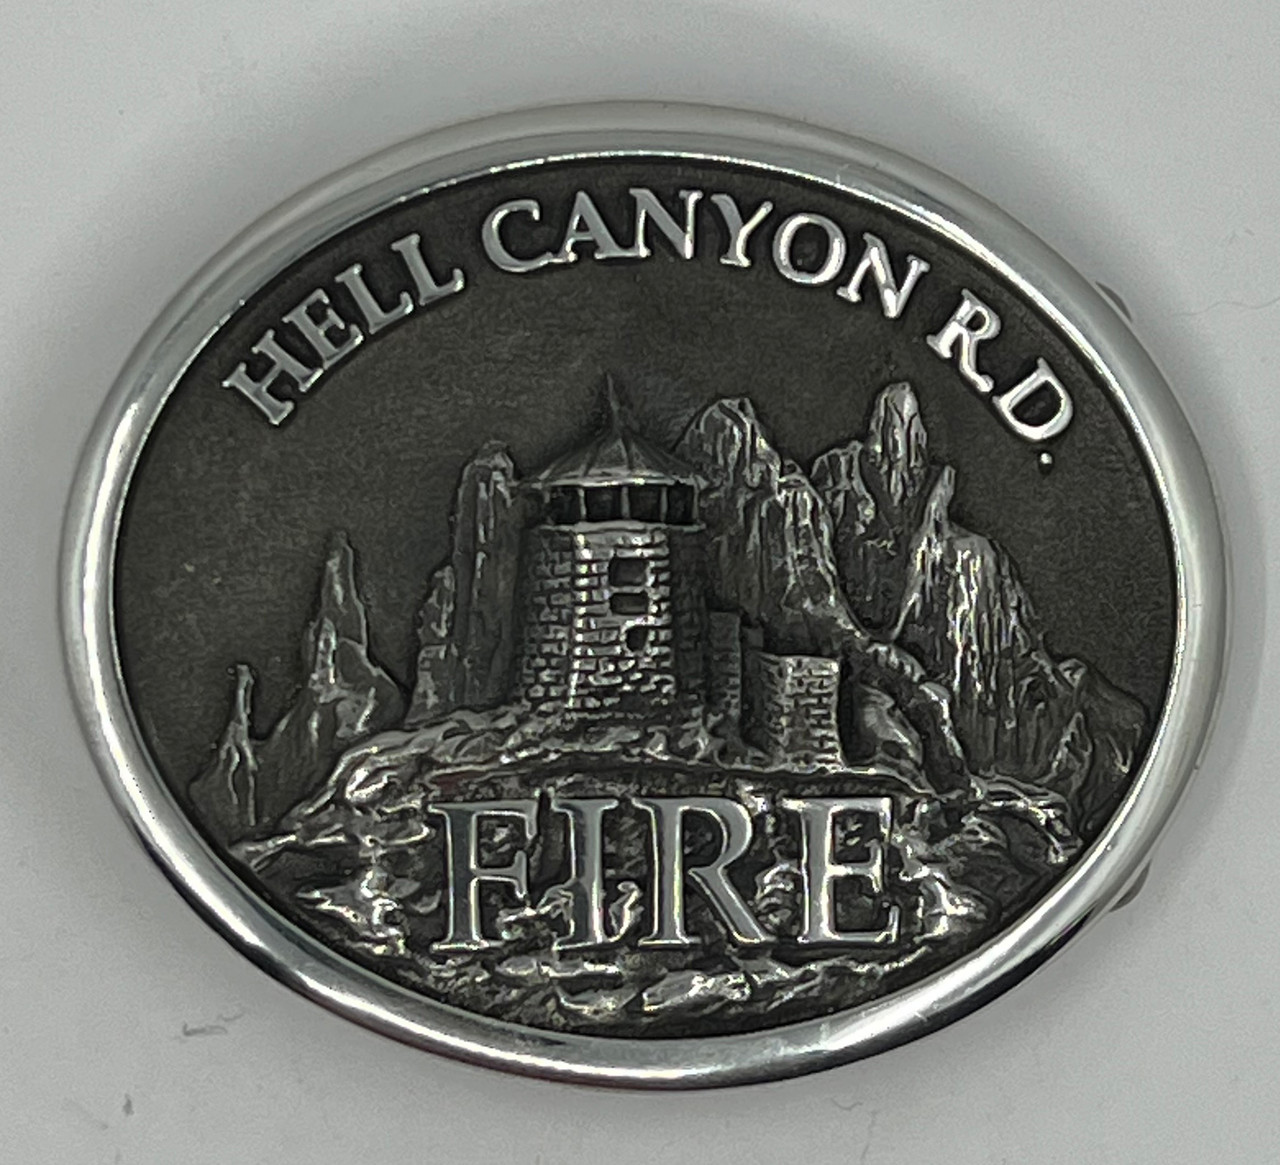 Hell Canyon Ranger District Fire Buckle (RESTRICTED)